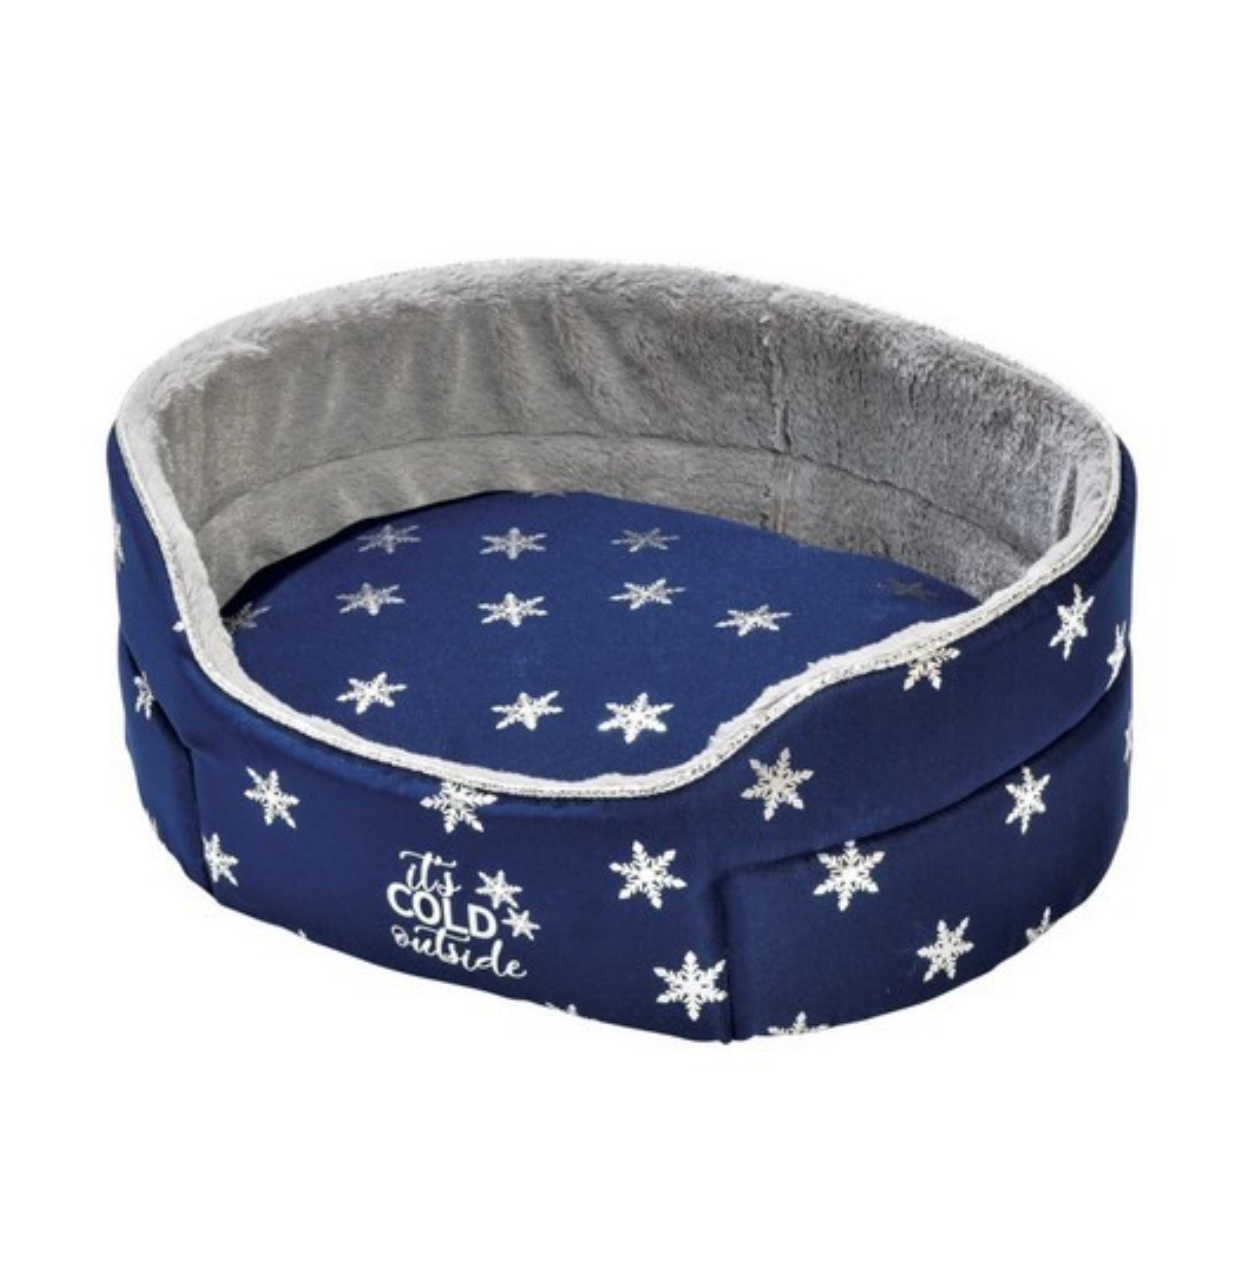 Bobby Corbeille Snowflake Pet Bed in Blue